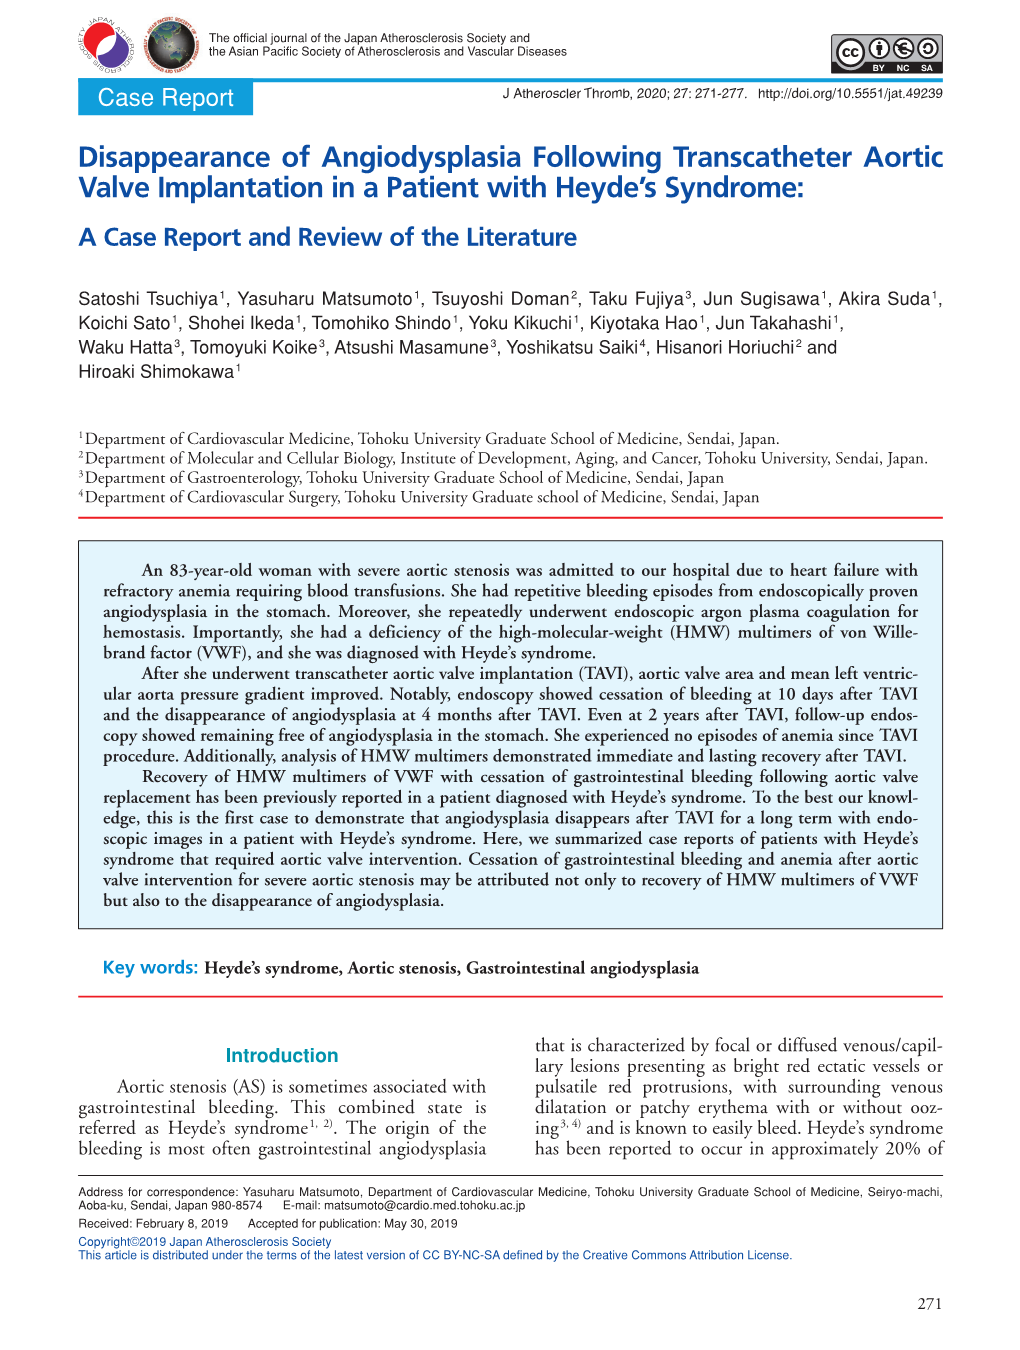 Disappearance of Angiodysplasia Following Transcatheter Aortic Valve Implantation in a Patient with Heyde’S Syndrome: a Case Report and Review of the Literature